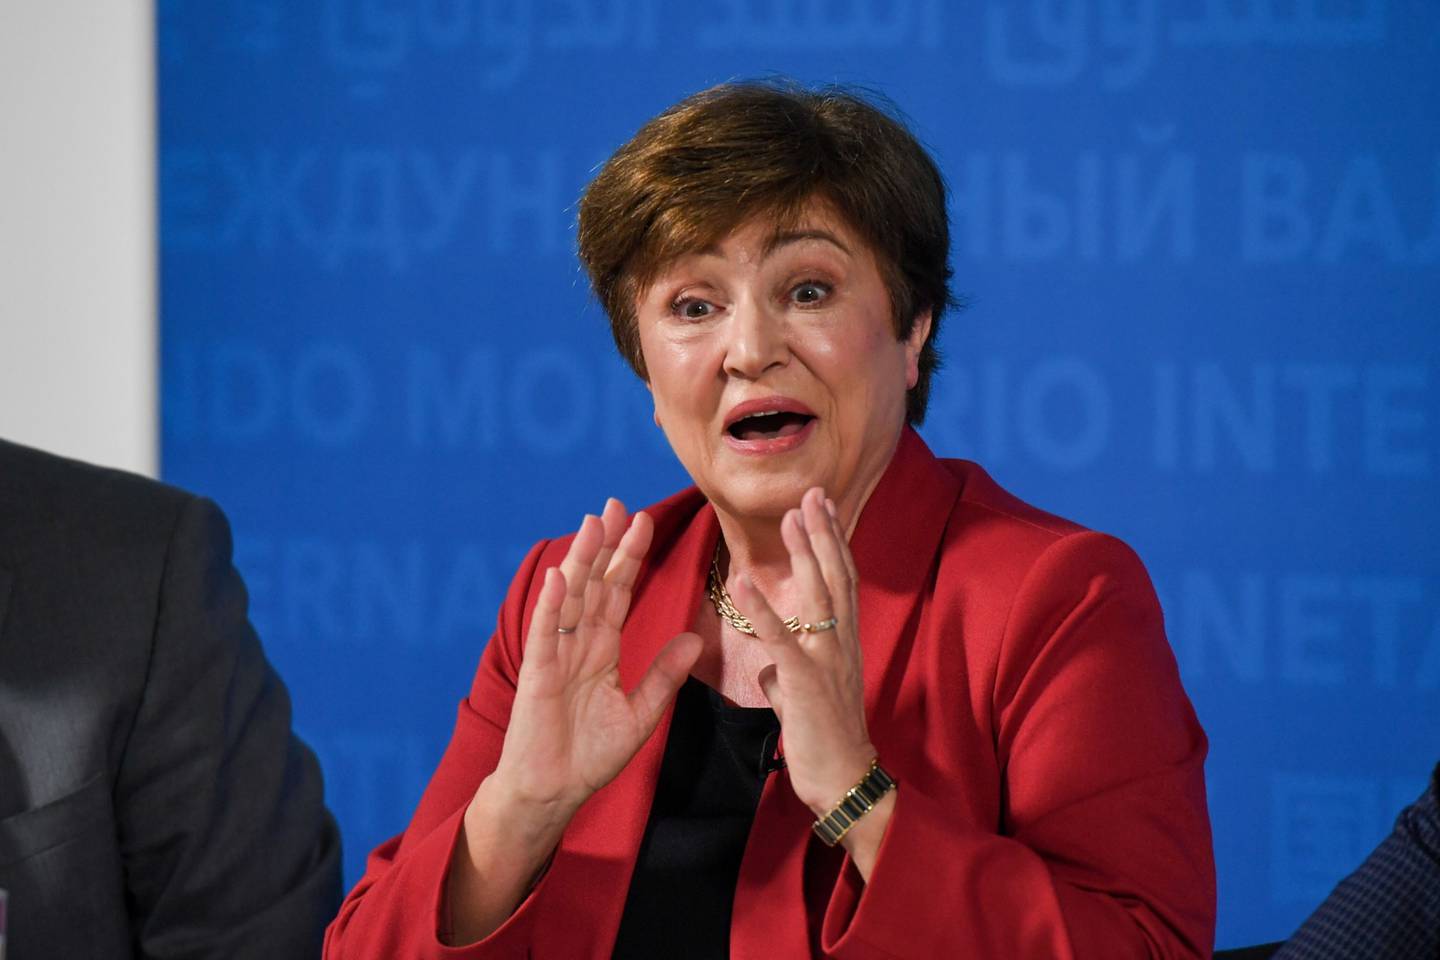 Kristalina Georgieva, managing director of the International Monetary Fund (IMF), speaks during a news conference in London, UK, on Tuesday, May 23, 2023. Photographer: Chris J. Ratcliffe/Bloombergdfd